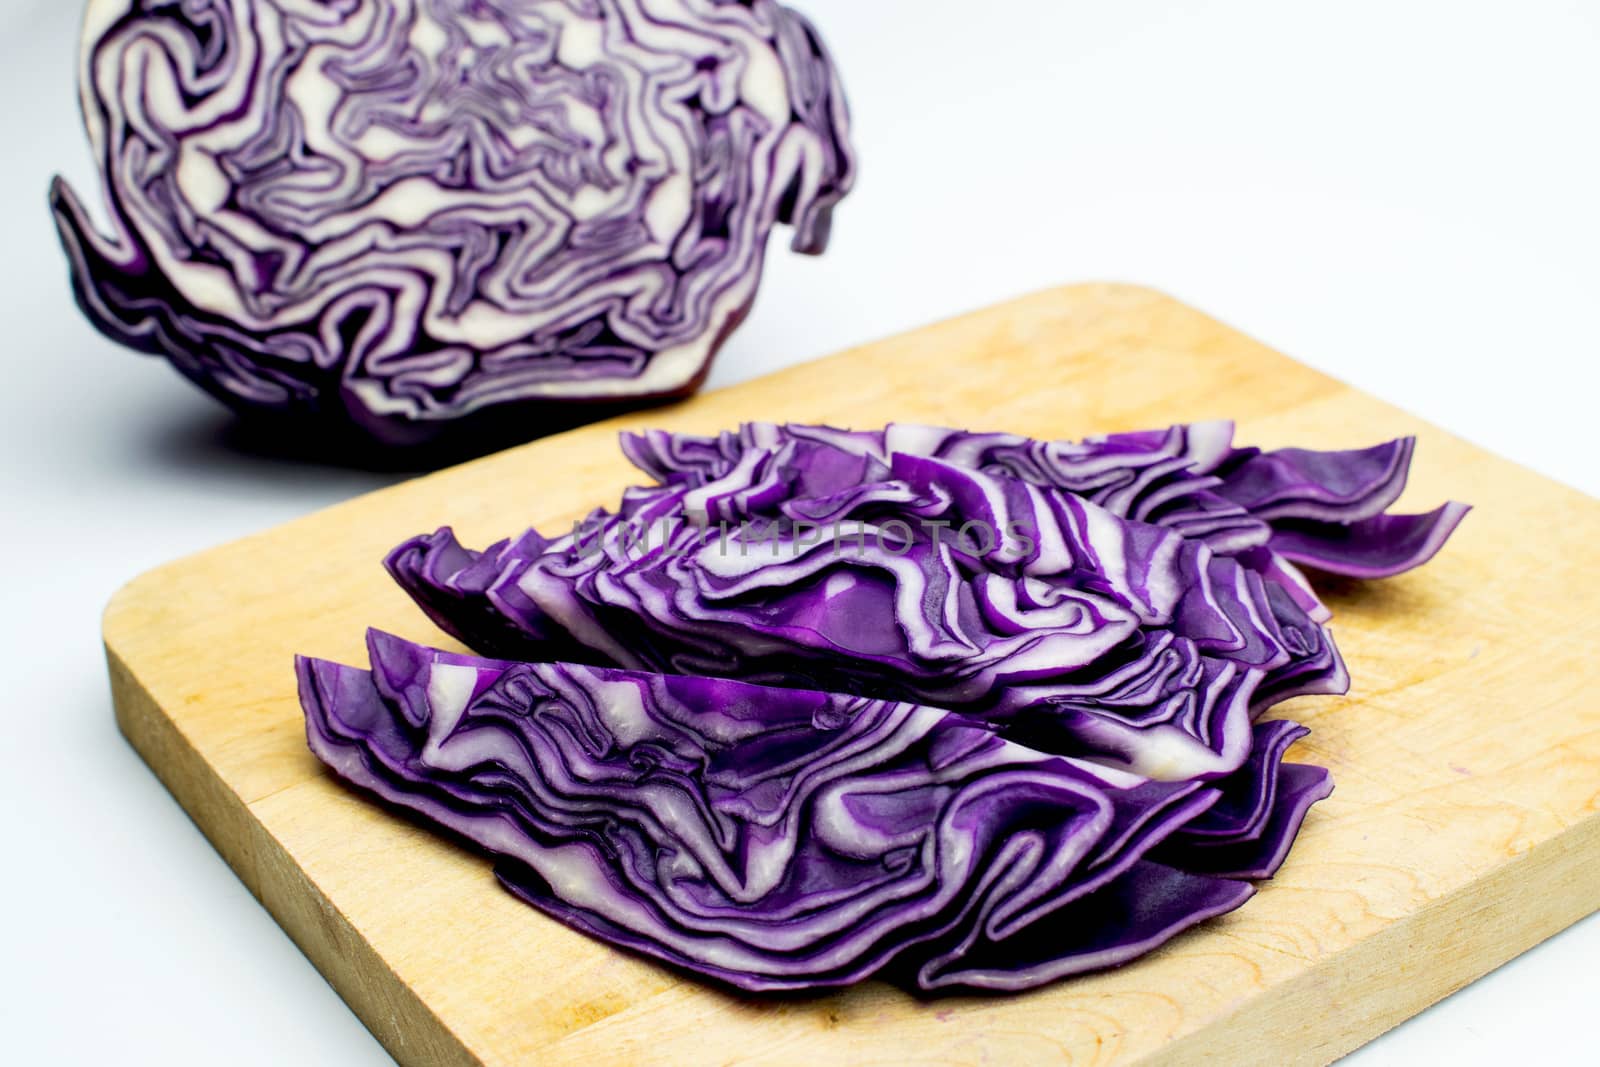 A portion of a red cabbage disposed on a white background